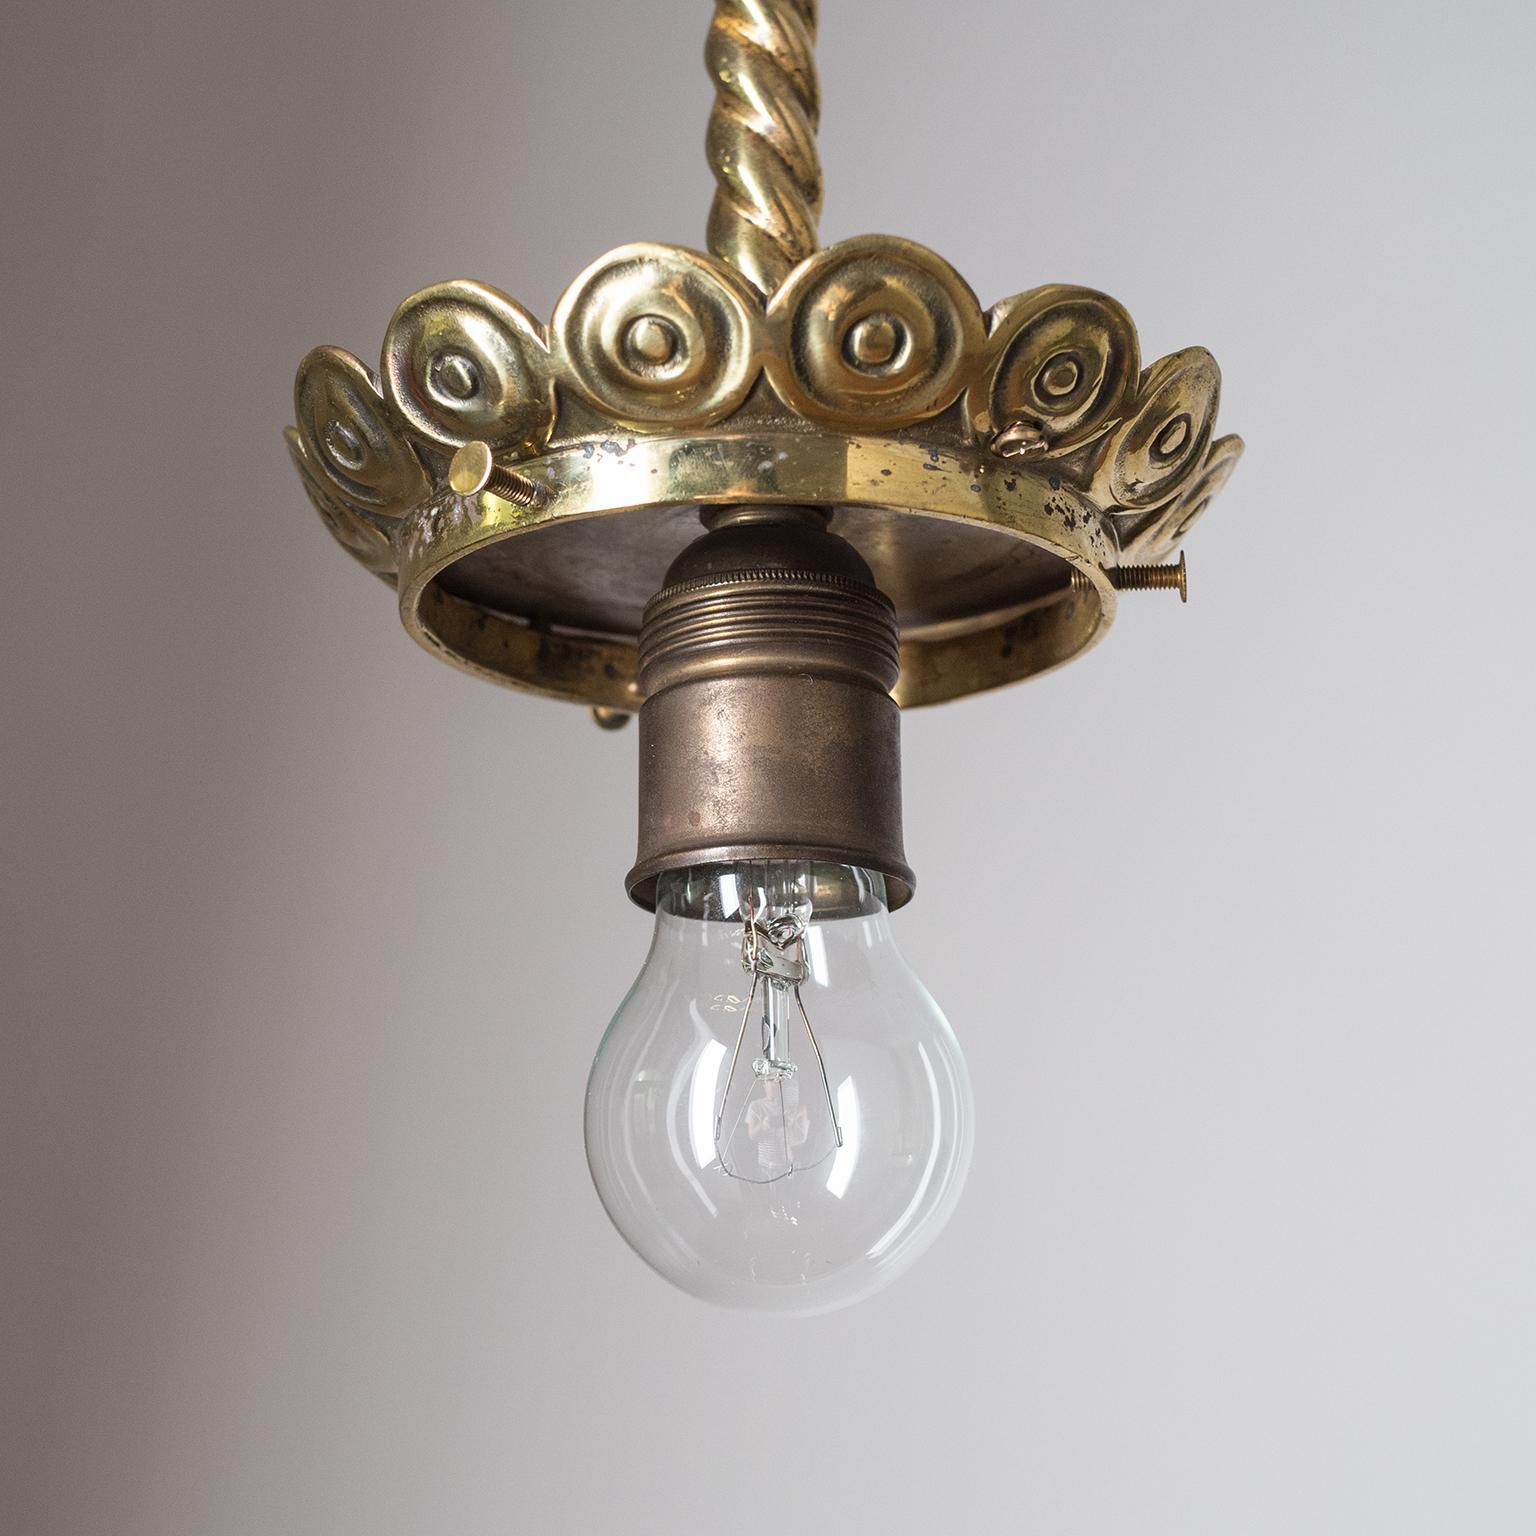 Cut Glass Ceiling Light, circa 1940 In Good Condition For Sale In Vienna, AT